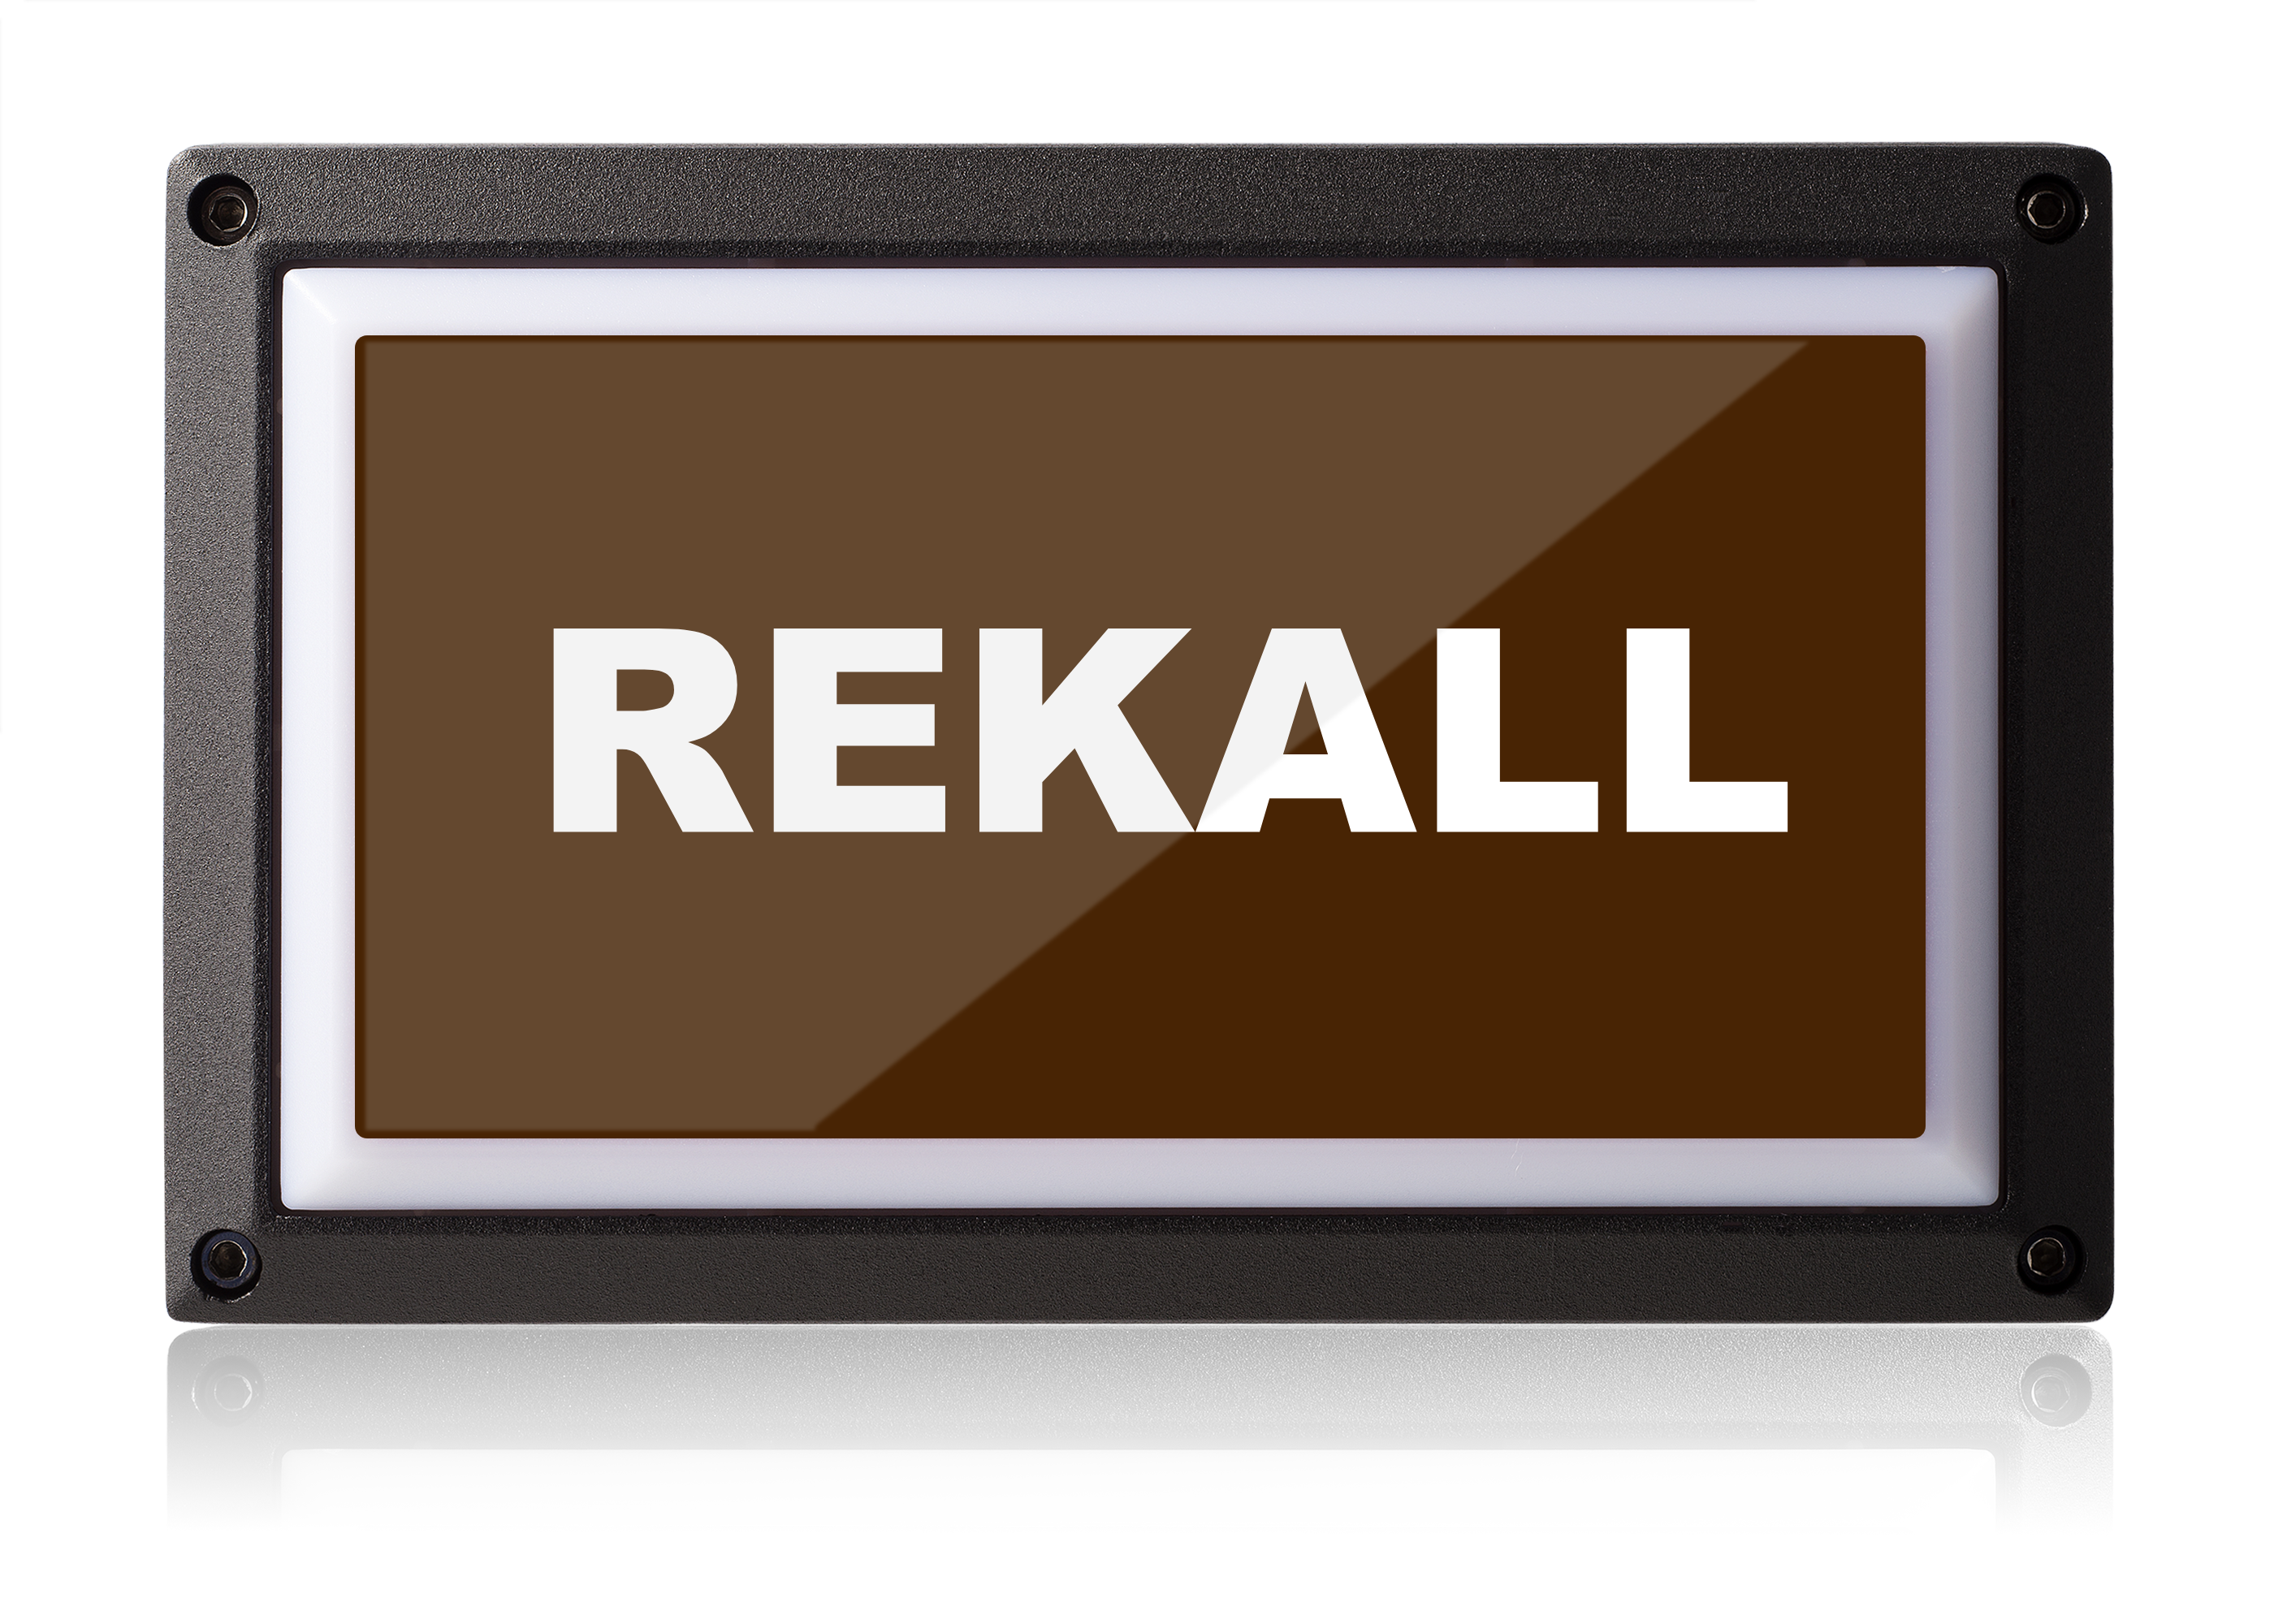 CT Scan In-Use Light - Rekall Dynamics LED Sign